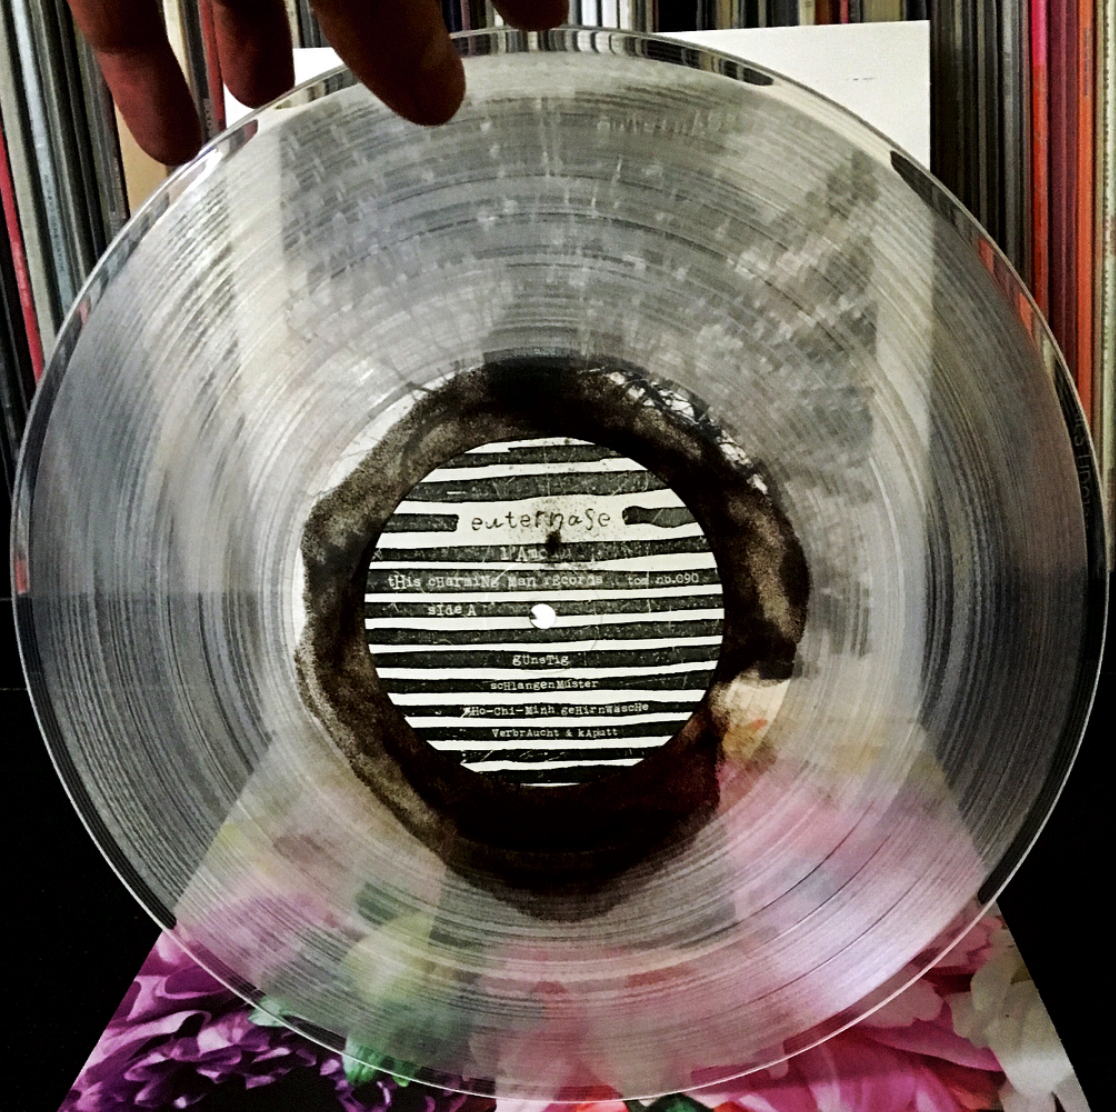 harpun Skal Lejlighedsvis 9 Clear Vinyl Records That Are Just So Stunning - UnifiedManufacturing